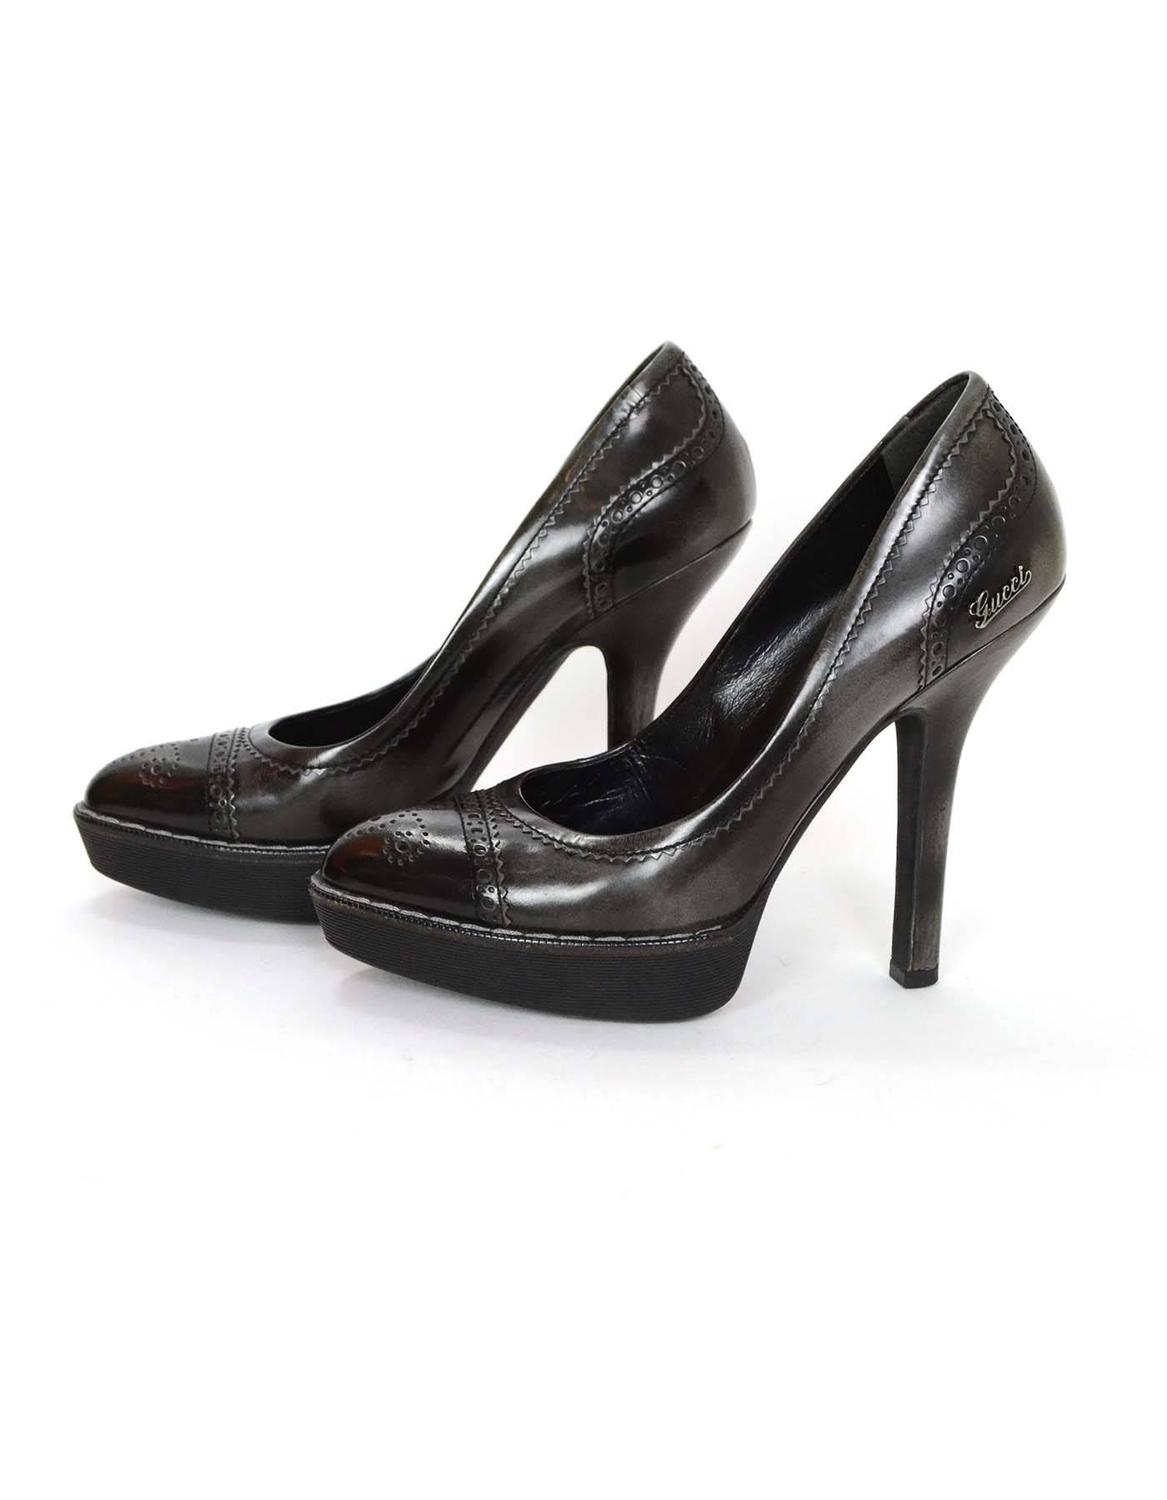 Gucci Black Leather Spectator Pumps Sz 37.5 w/ Dust Bag For Sale at 1stdibs